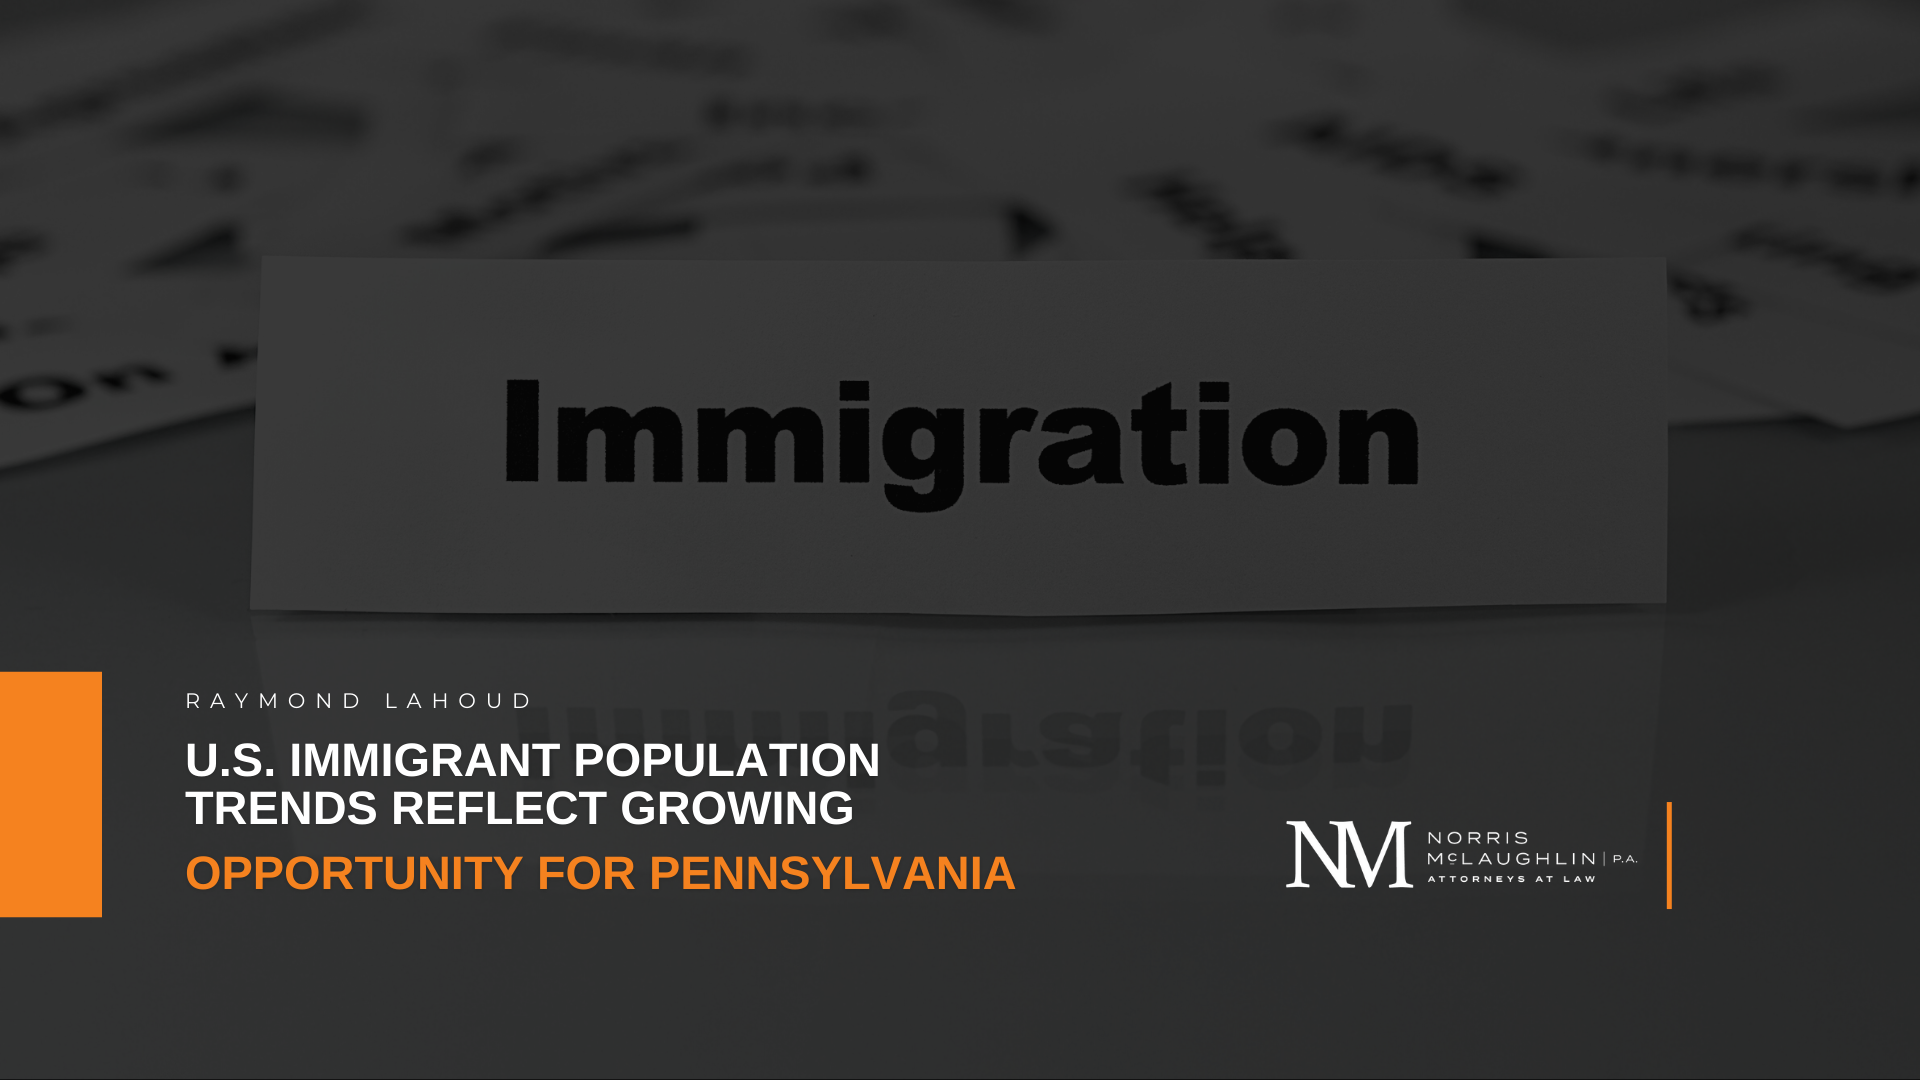 U.S. Immigrant Population Trends Reflect Growing Economic Opportunity for Pennsylvania